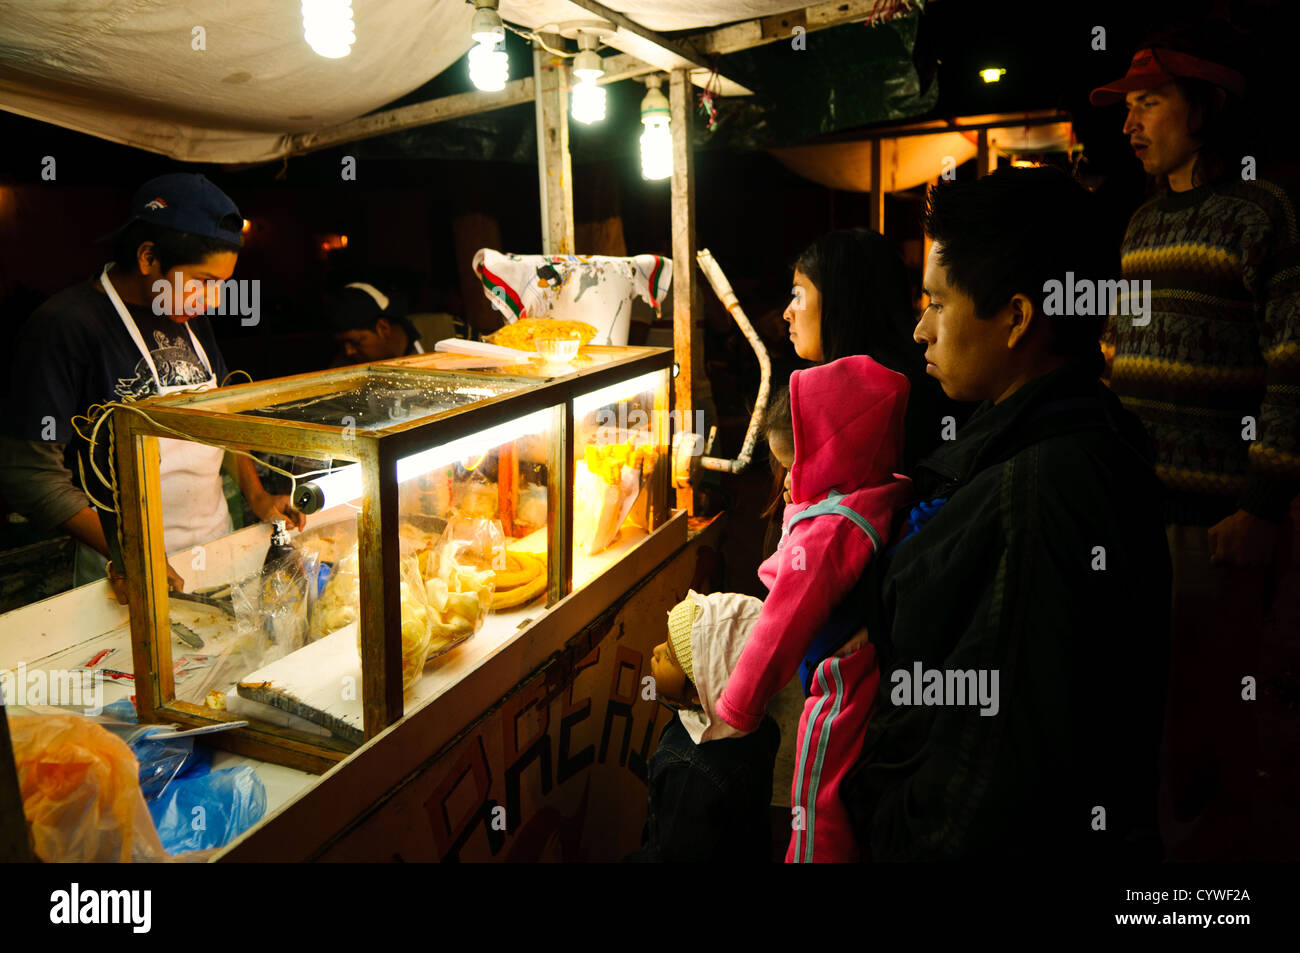 A family buys dinner at a street food vendor as part of a night market set up for the holiday of Our Lady of Guadalupe Day in Antigua, Guatemala. Stock Photo